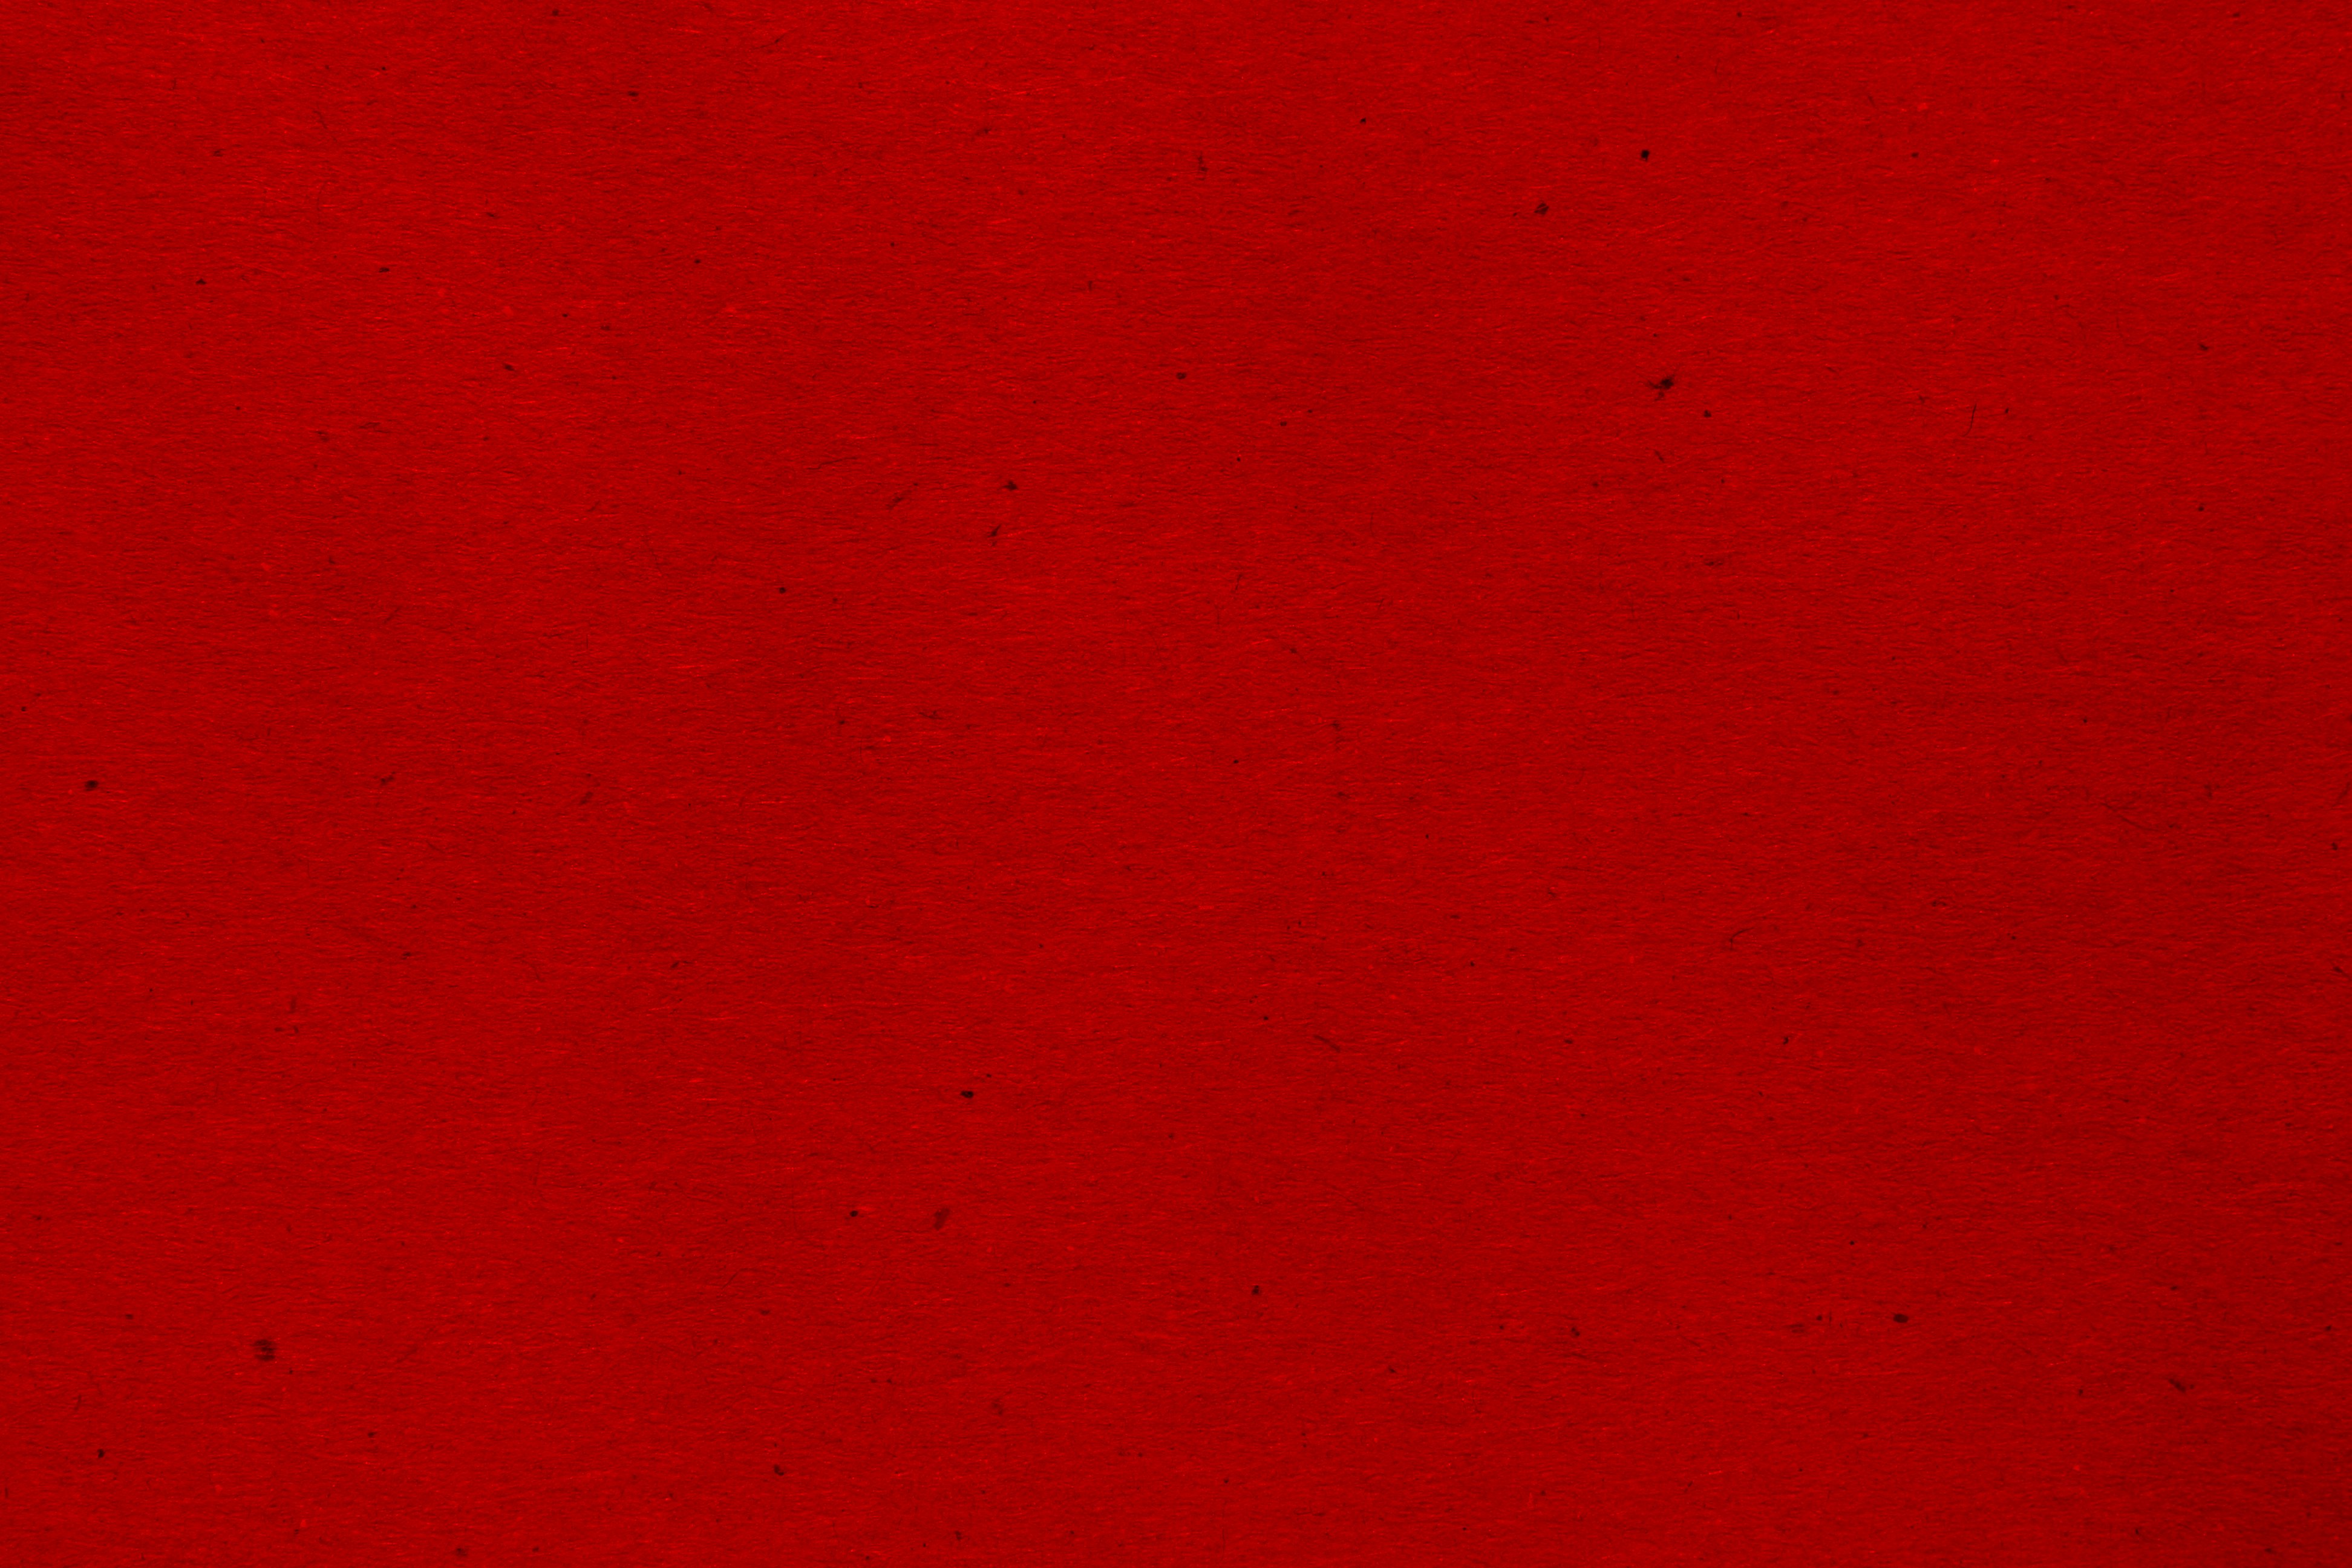 Deep Red Paper Texture with Flecks Picture Free Photograph Photos